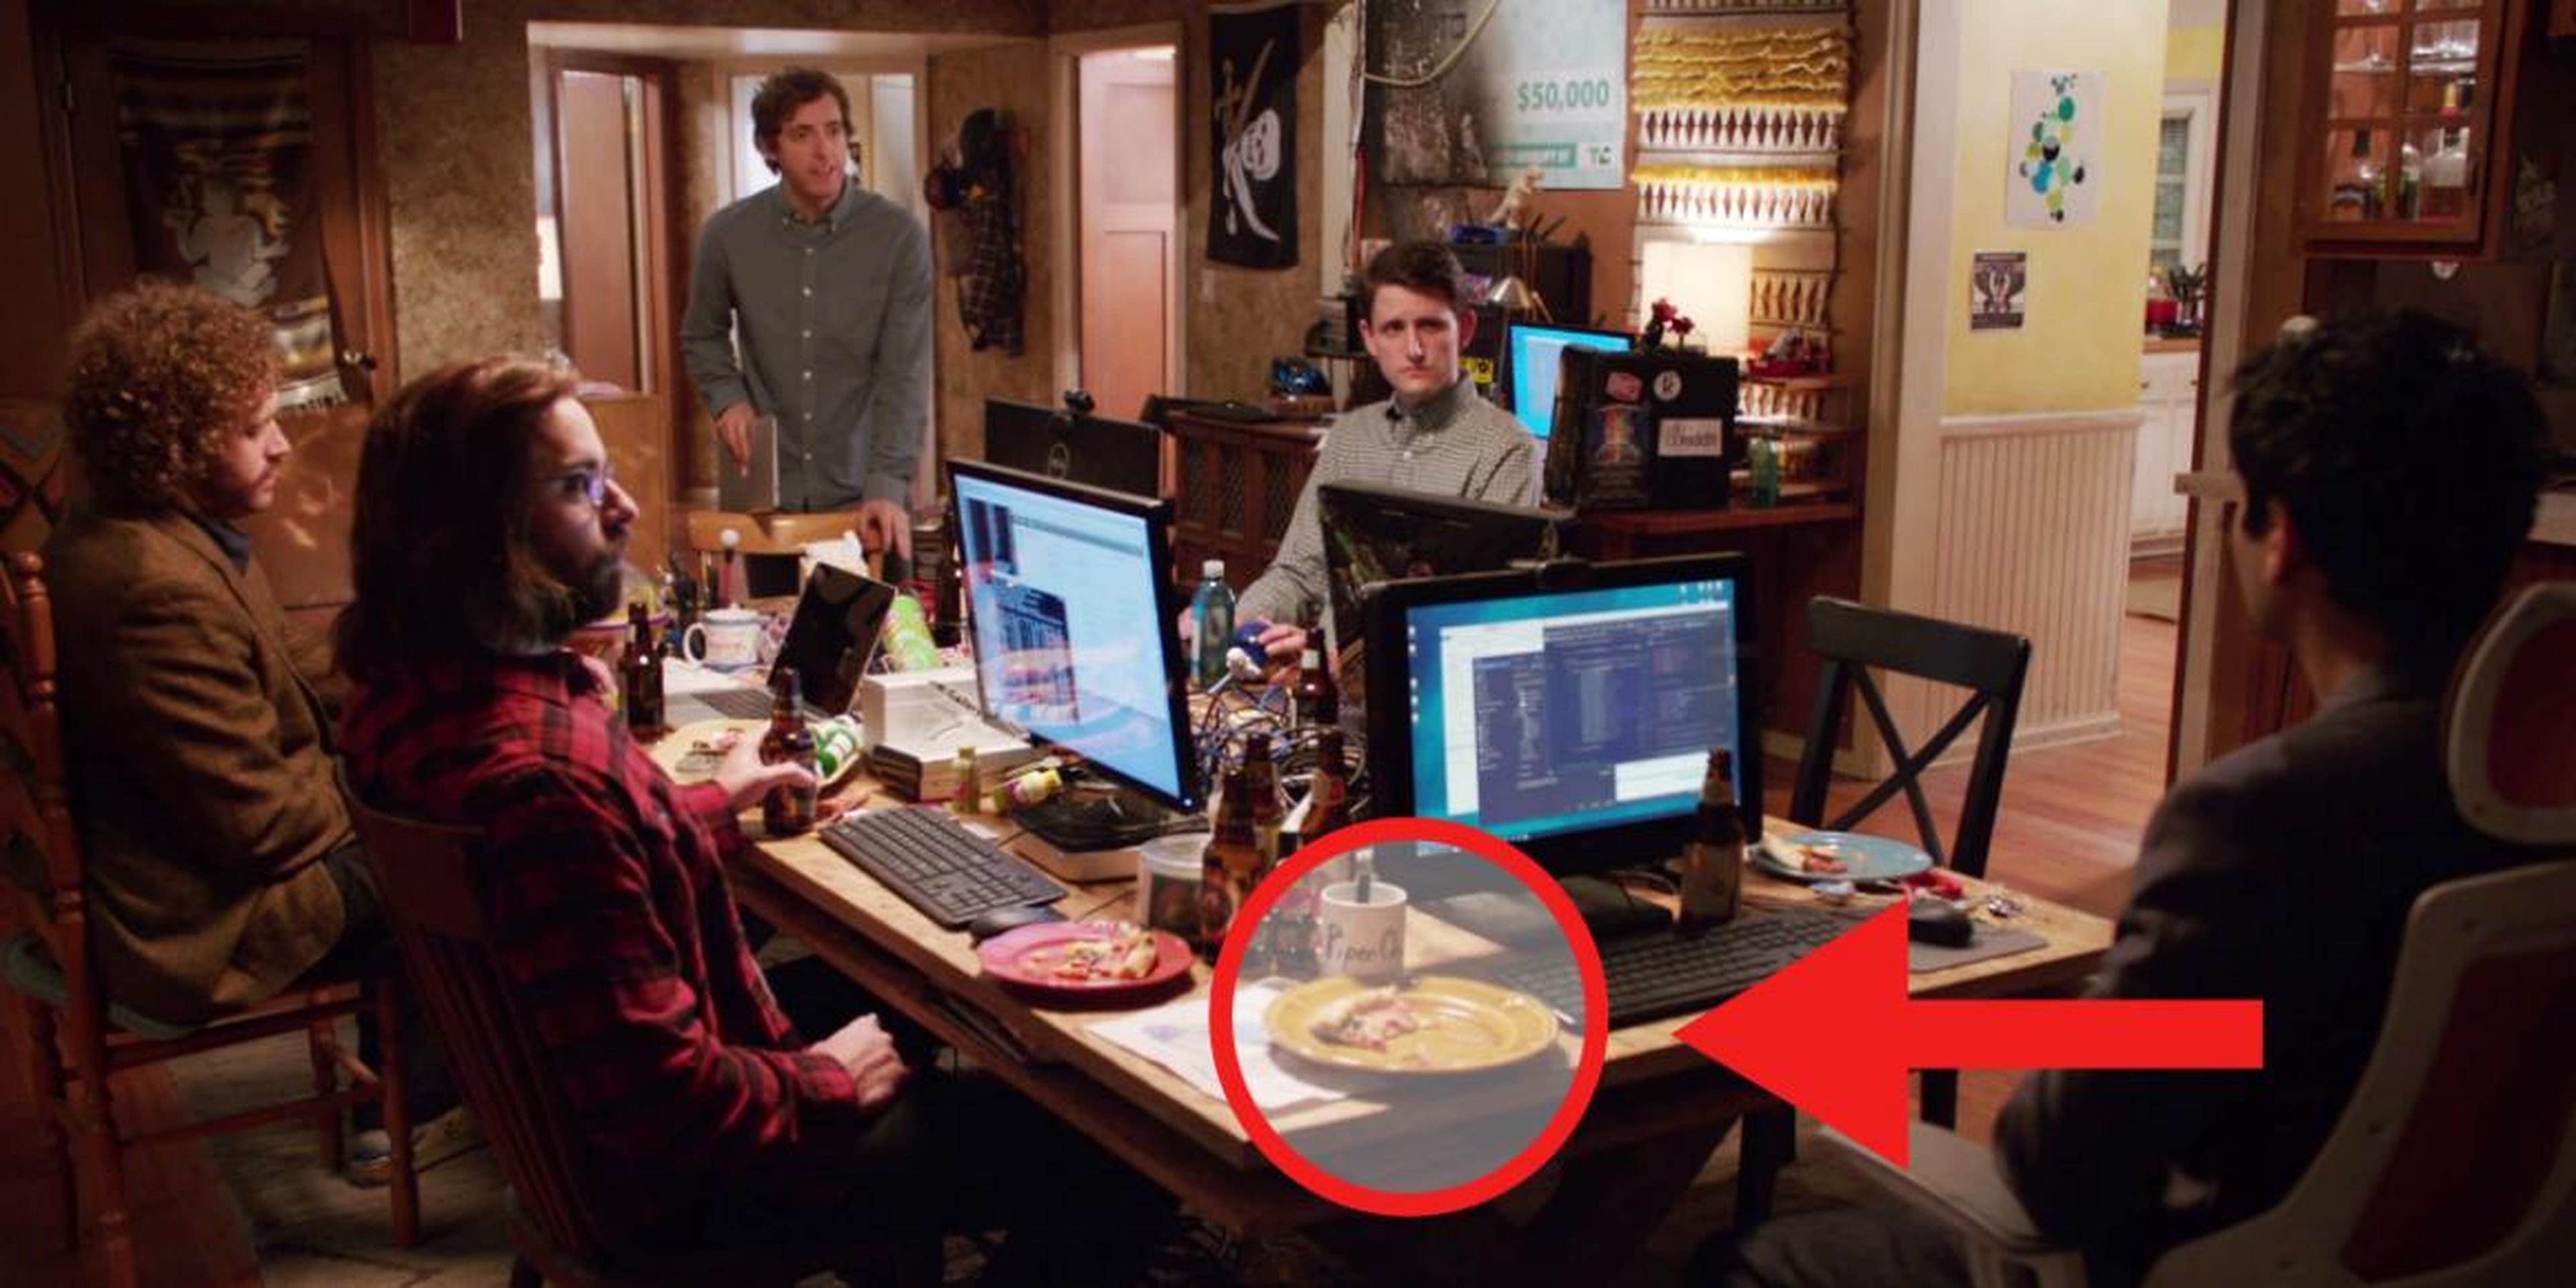 The robot-made pizza had a small cameo on season four of HBO's "Silicon Valley."